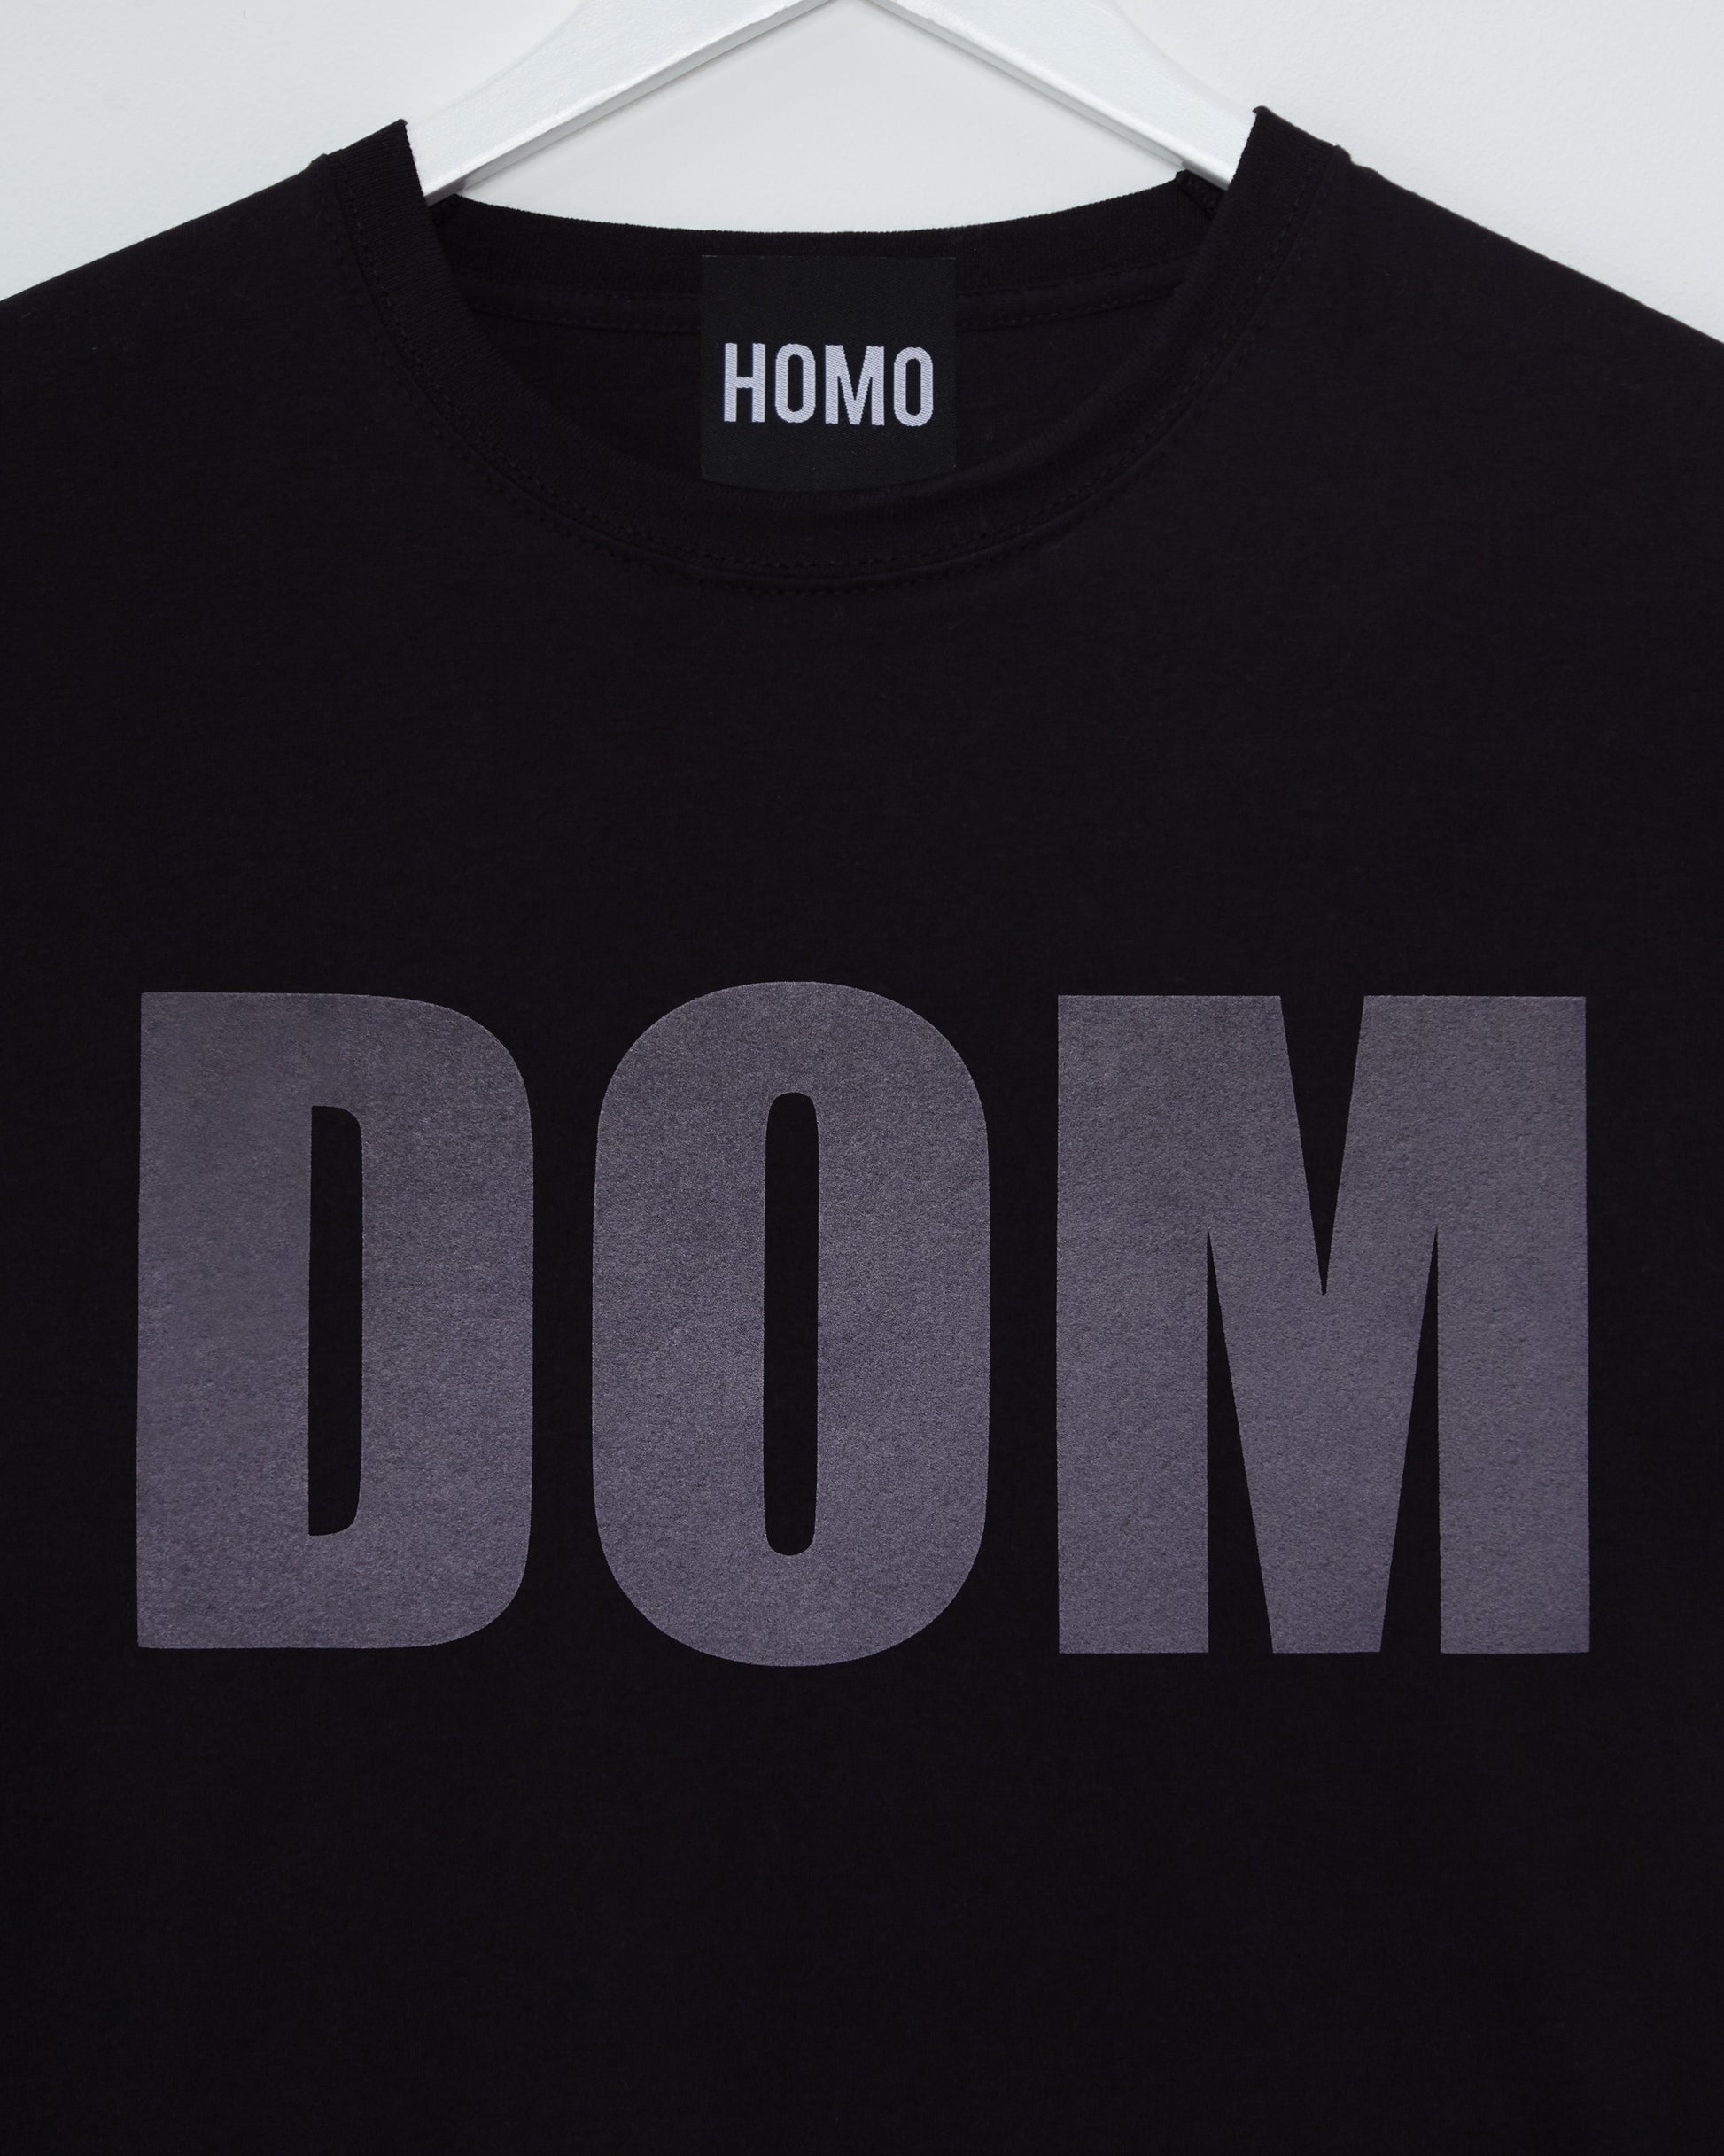 Explore Your Dominant Side with DOM: Grey Flock Print on Black Men's Tshirt - HOMOLONDON